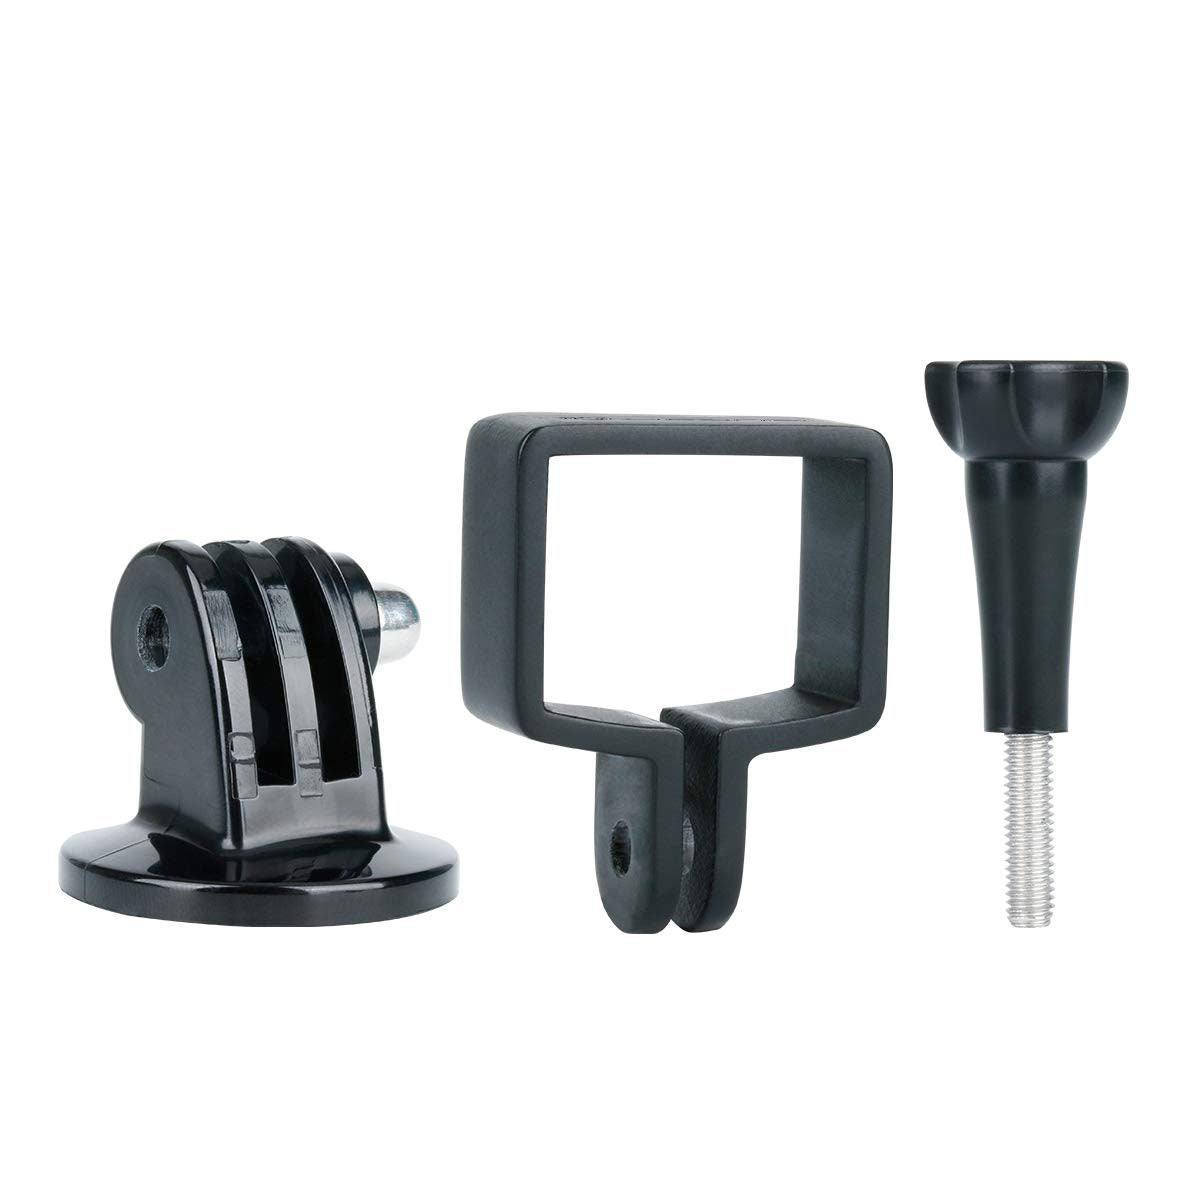 Ulanzi OP-3 Osmo Pocket Accessories Mobile Phone Holder Mount Set Fixed Stand Bracket for Dji Osmo Pocket Handheld Cameras